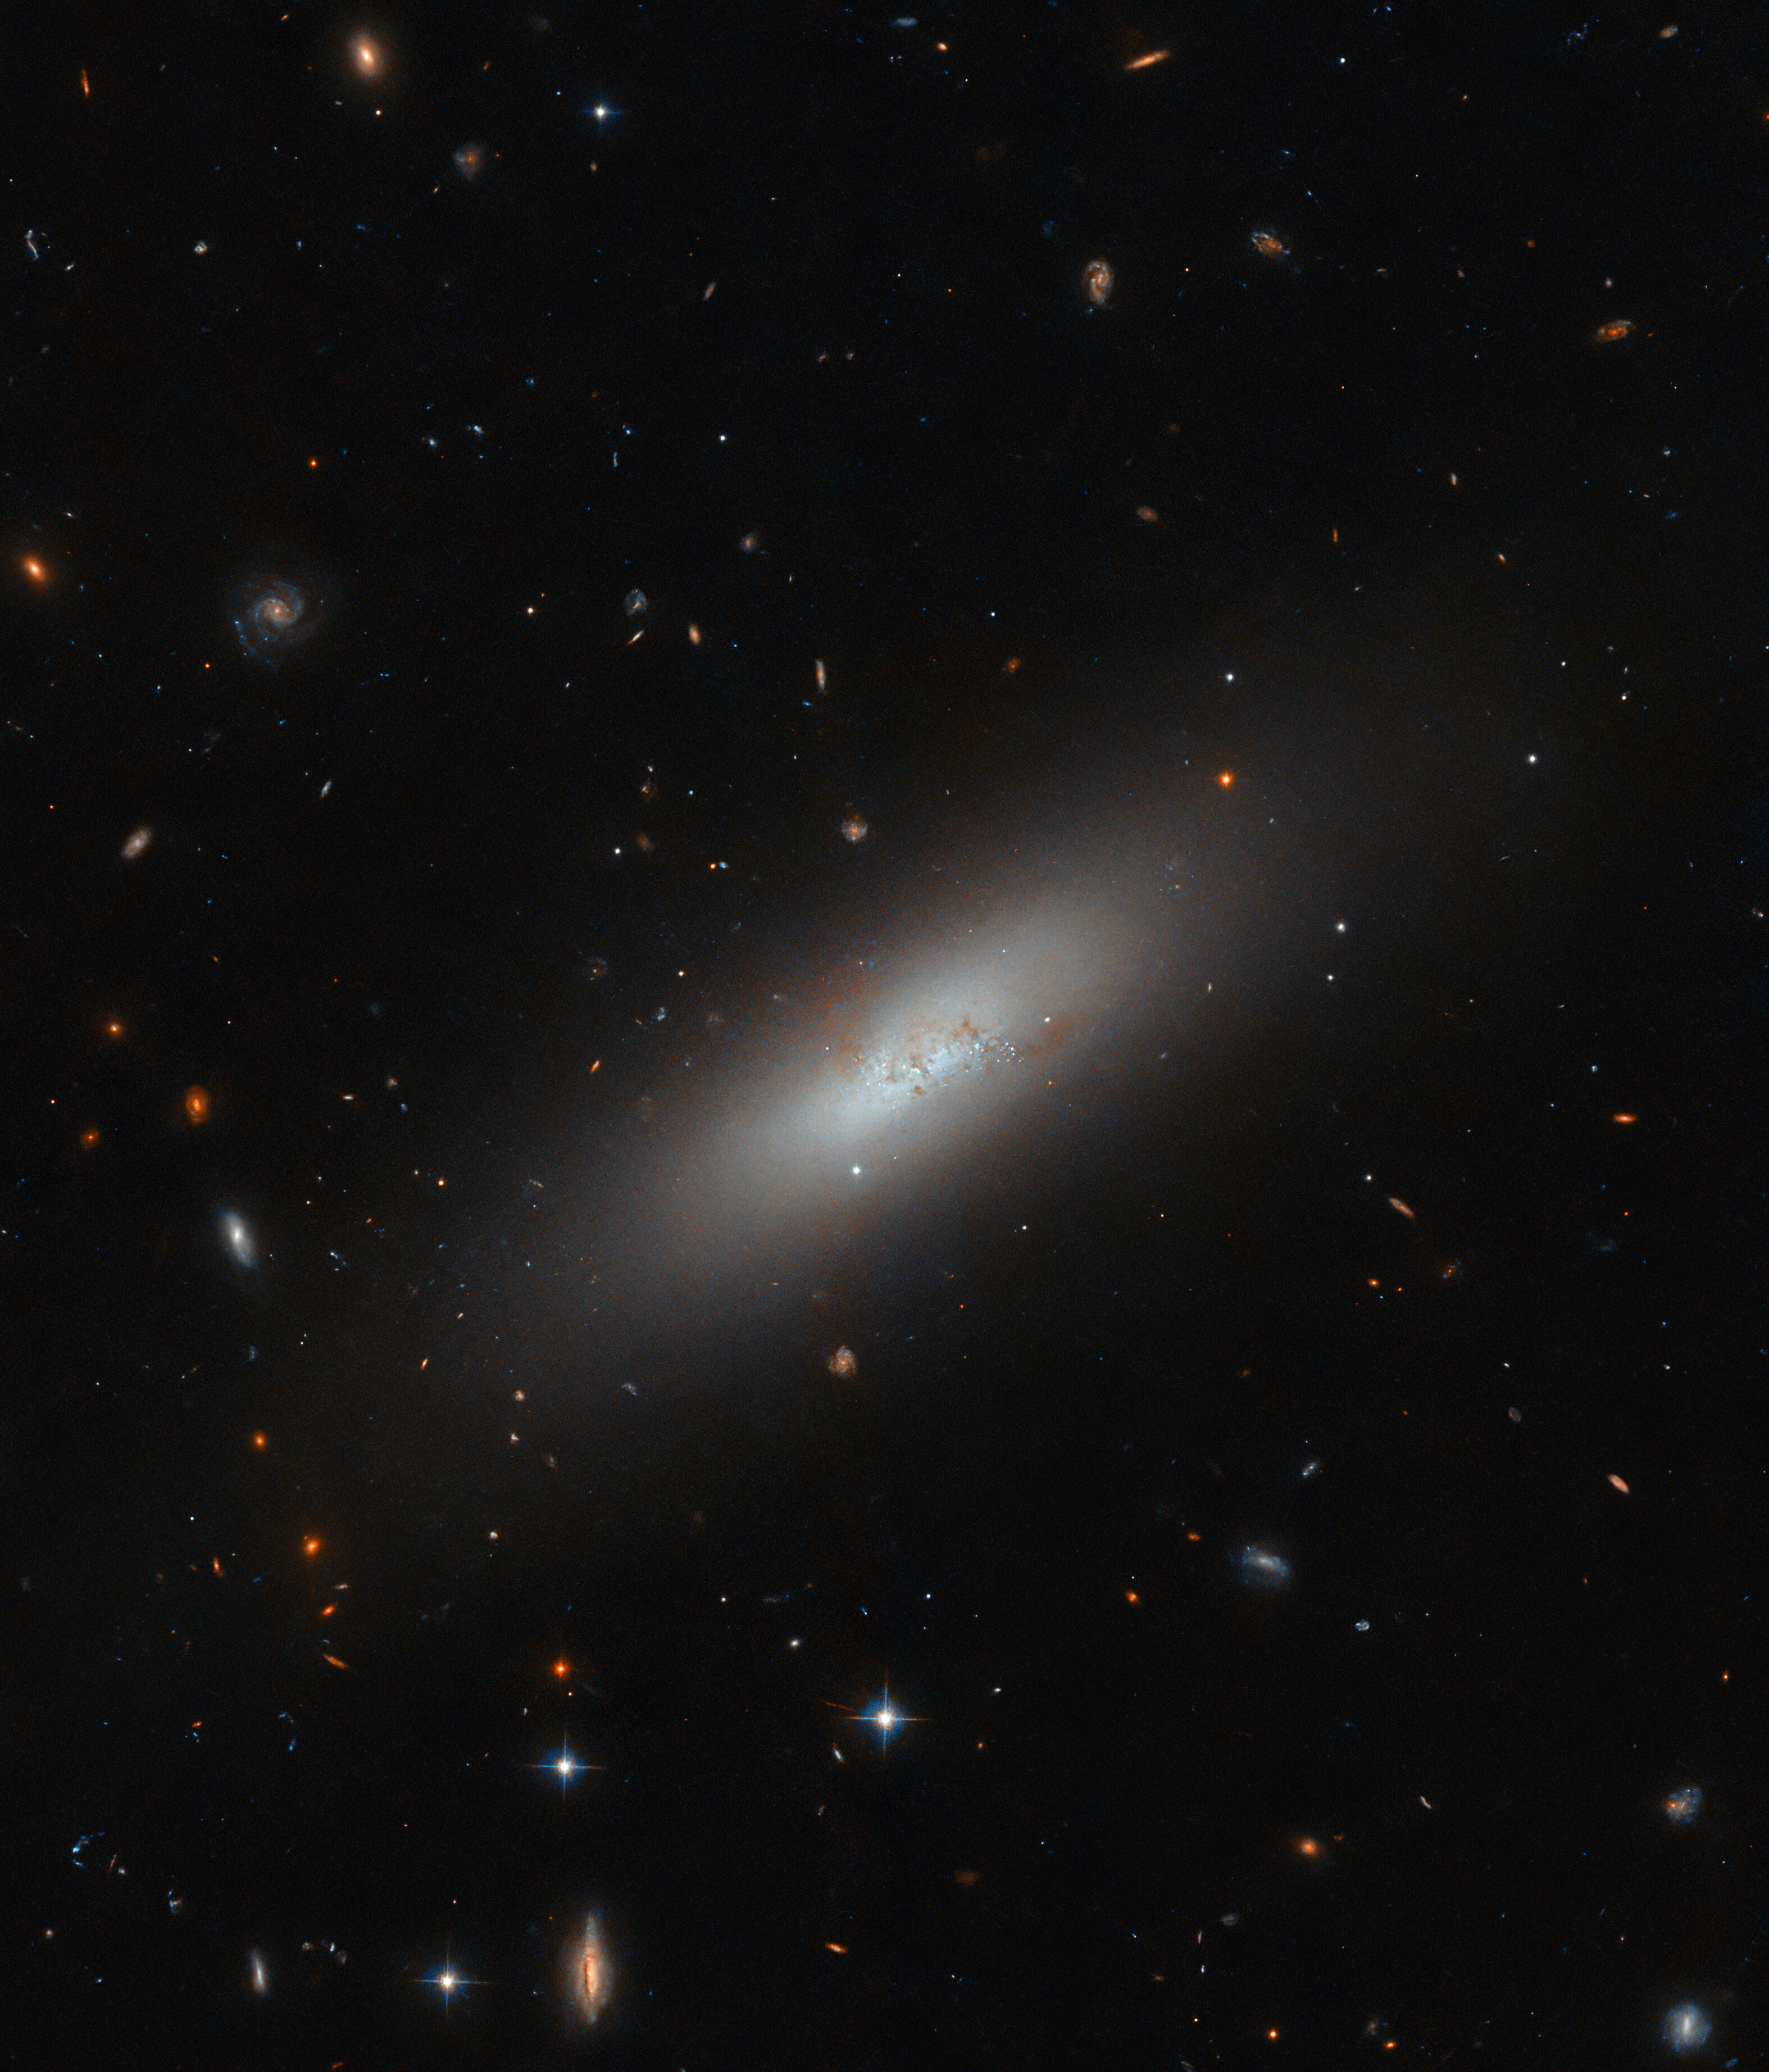 A relatively small, oval-shaped galaxy, tilted diagonally. Its center glows brightly and dims gradually to its edge. Its center also holds a few small, blue, glowing spots where stars are forming and dark wisps of dust that cross the galaxy. The image has a black background on which many background galaxies and foreground stars are visible.